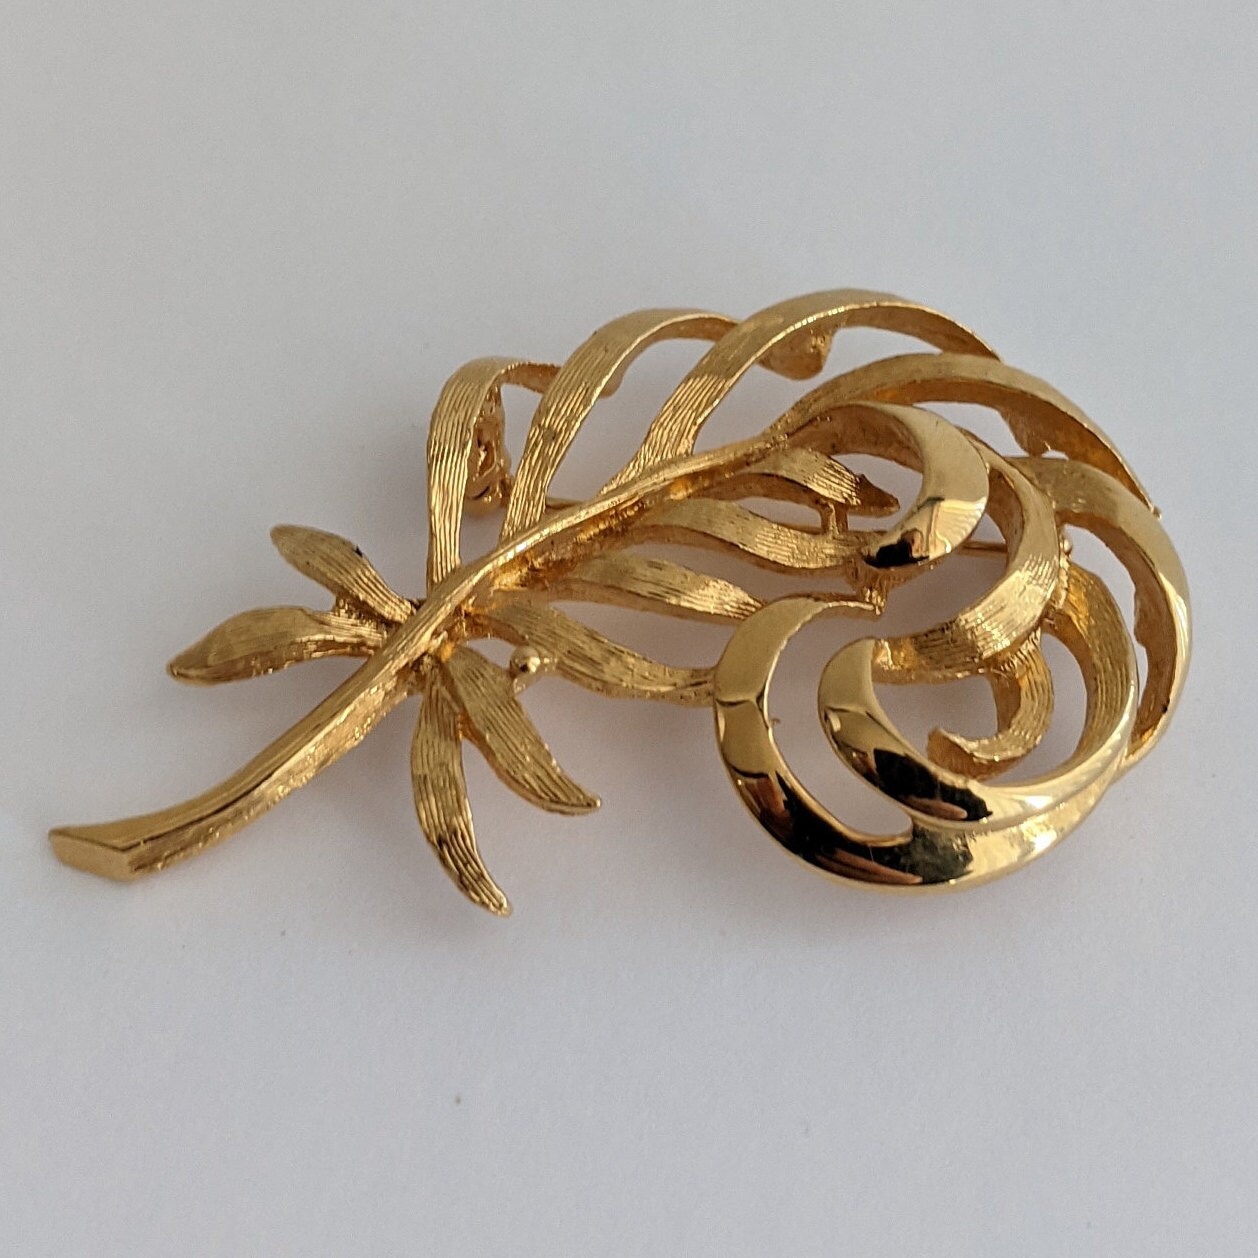 Vintage Napier Brooch Feather Brooch Polished and Textured Goldtone ...